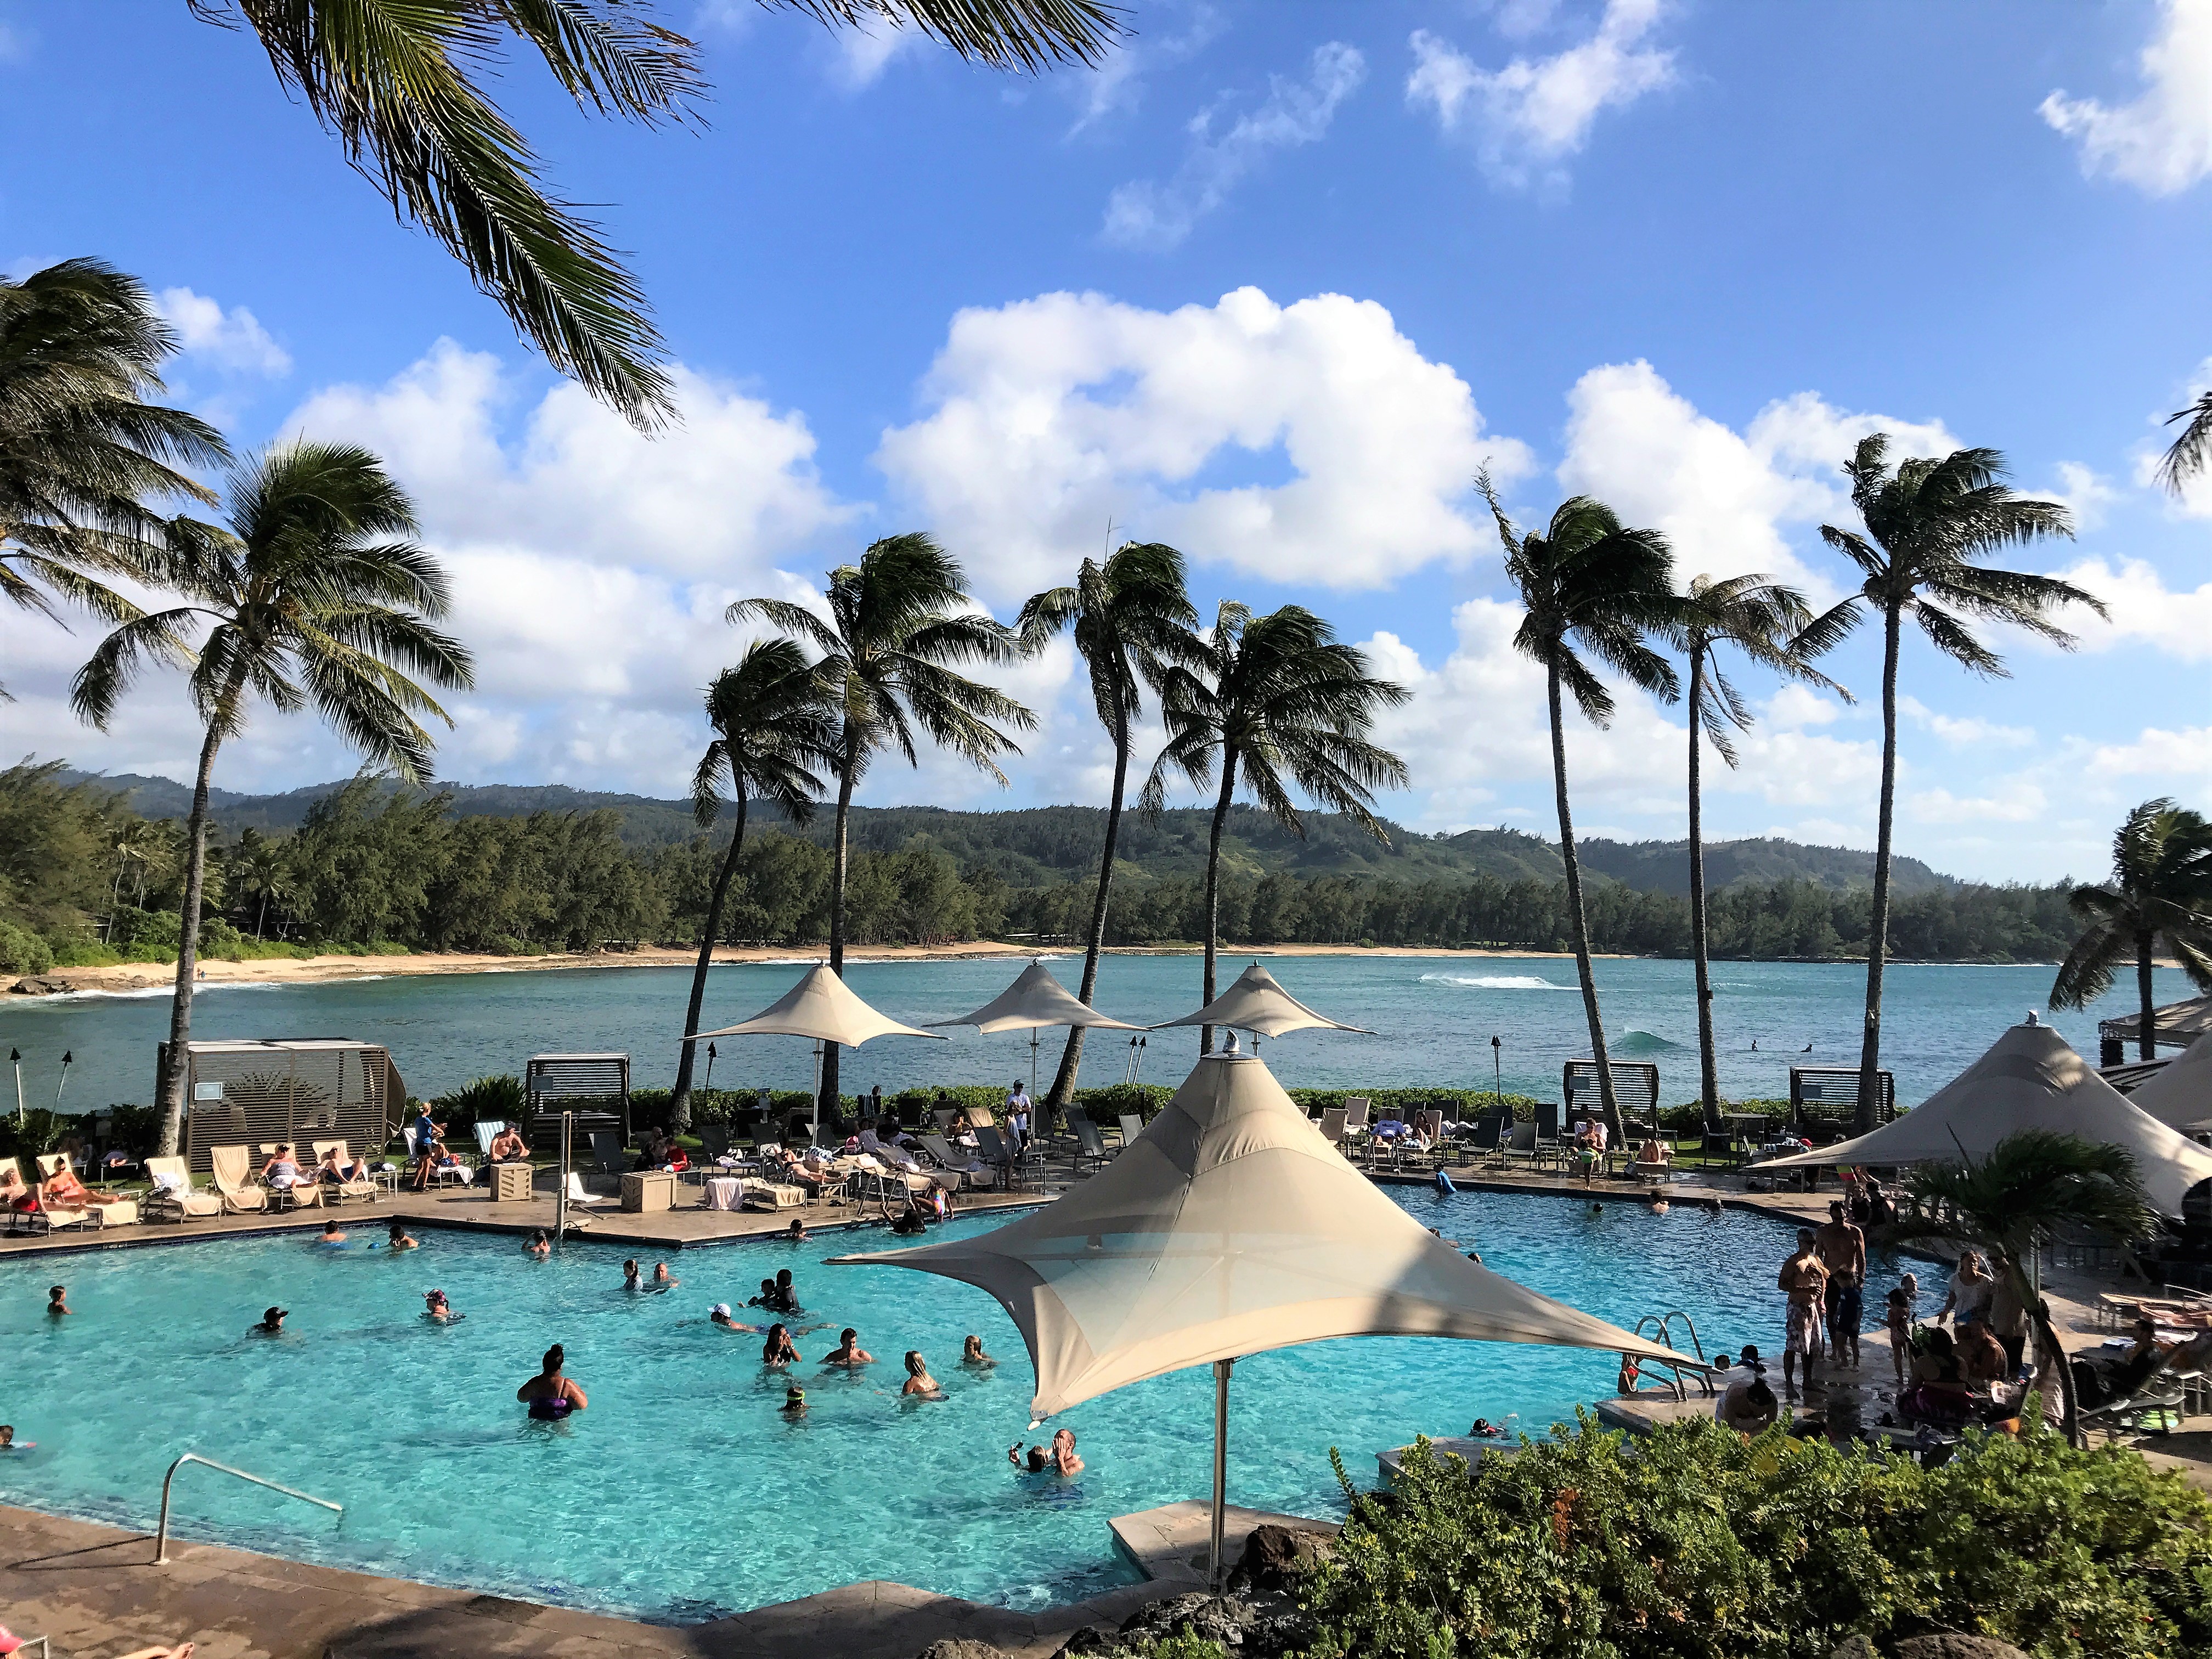 Turtle Bay Resort Beach Cottages on Oahu, Hawaii review - Turning left for less4032 x 3024